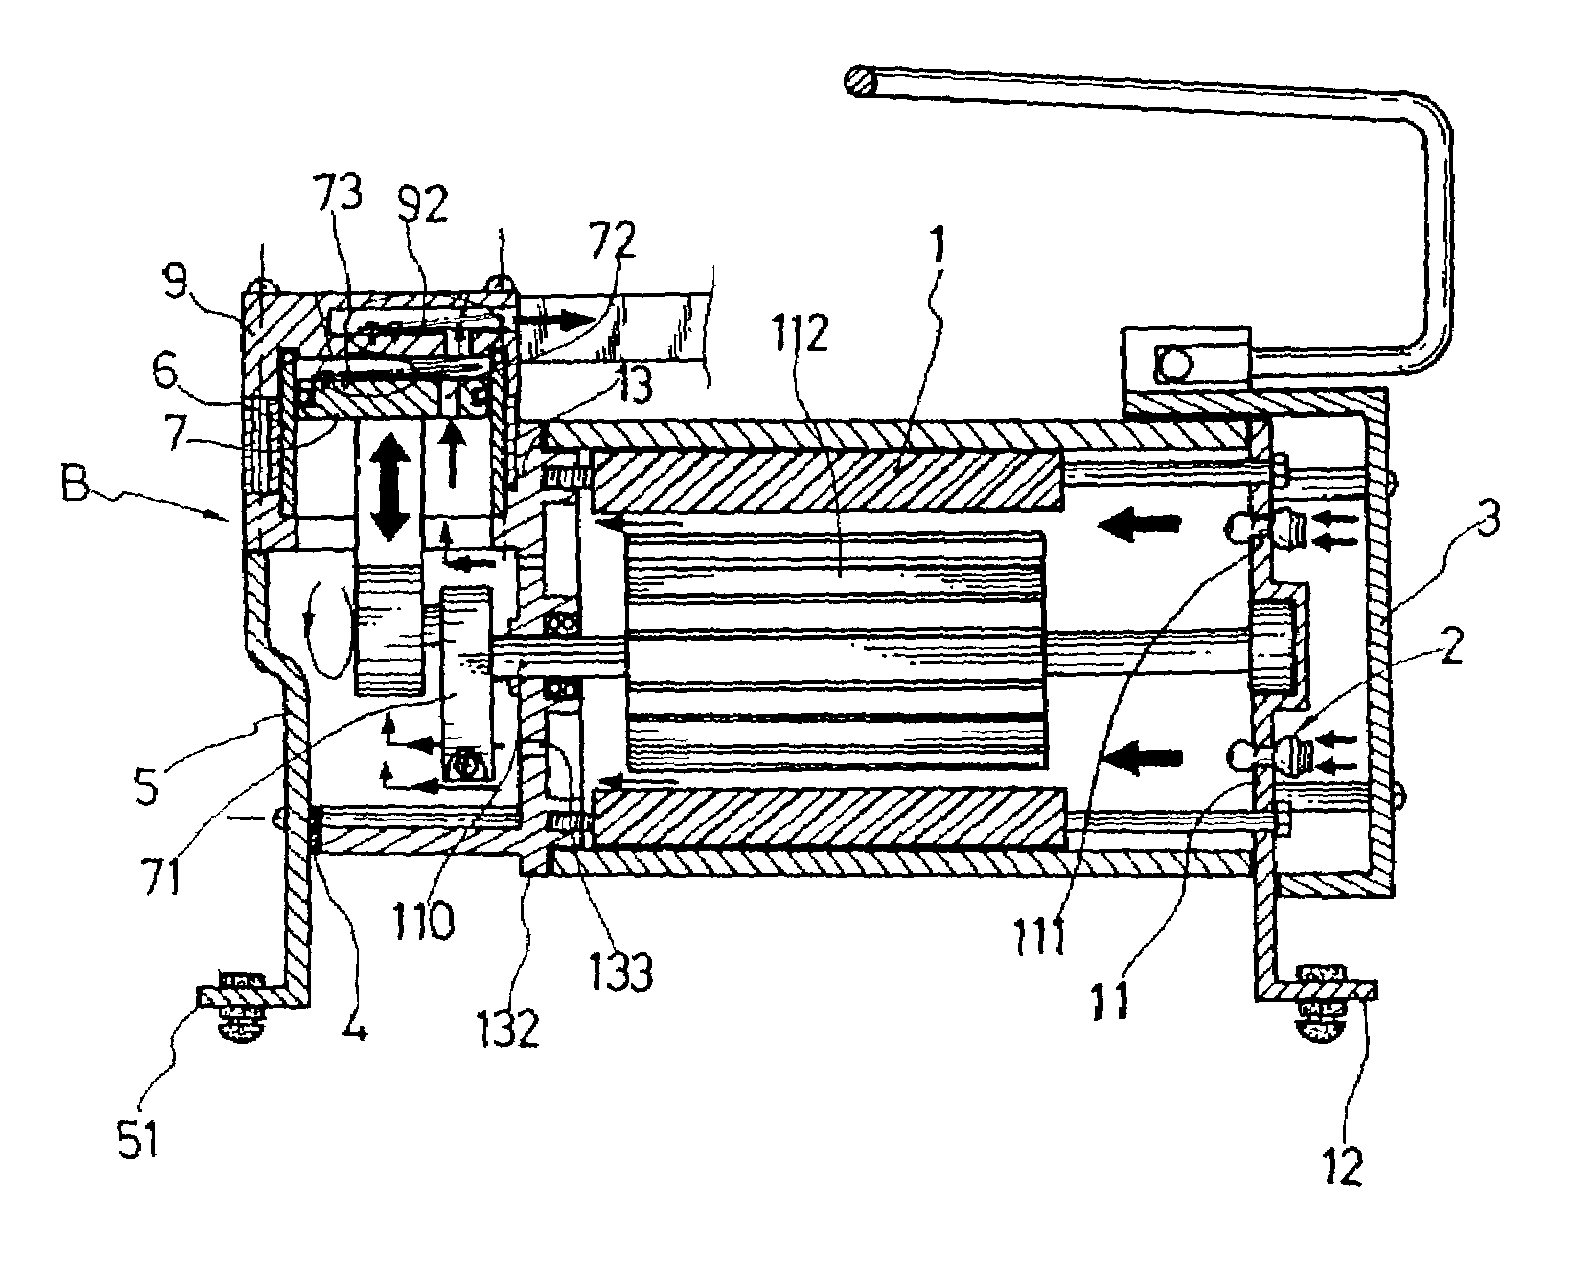 Structure of an air inflation device